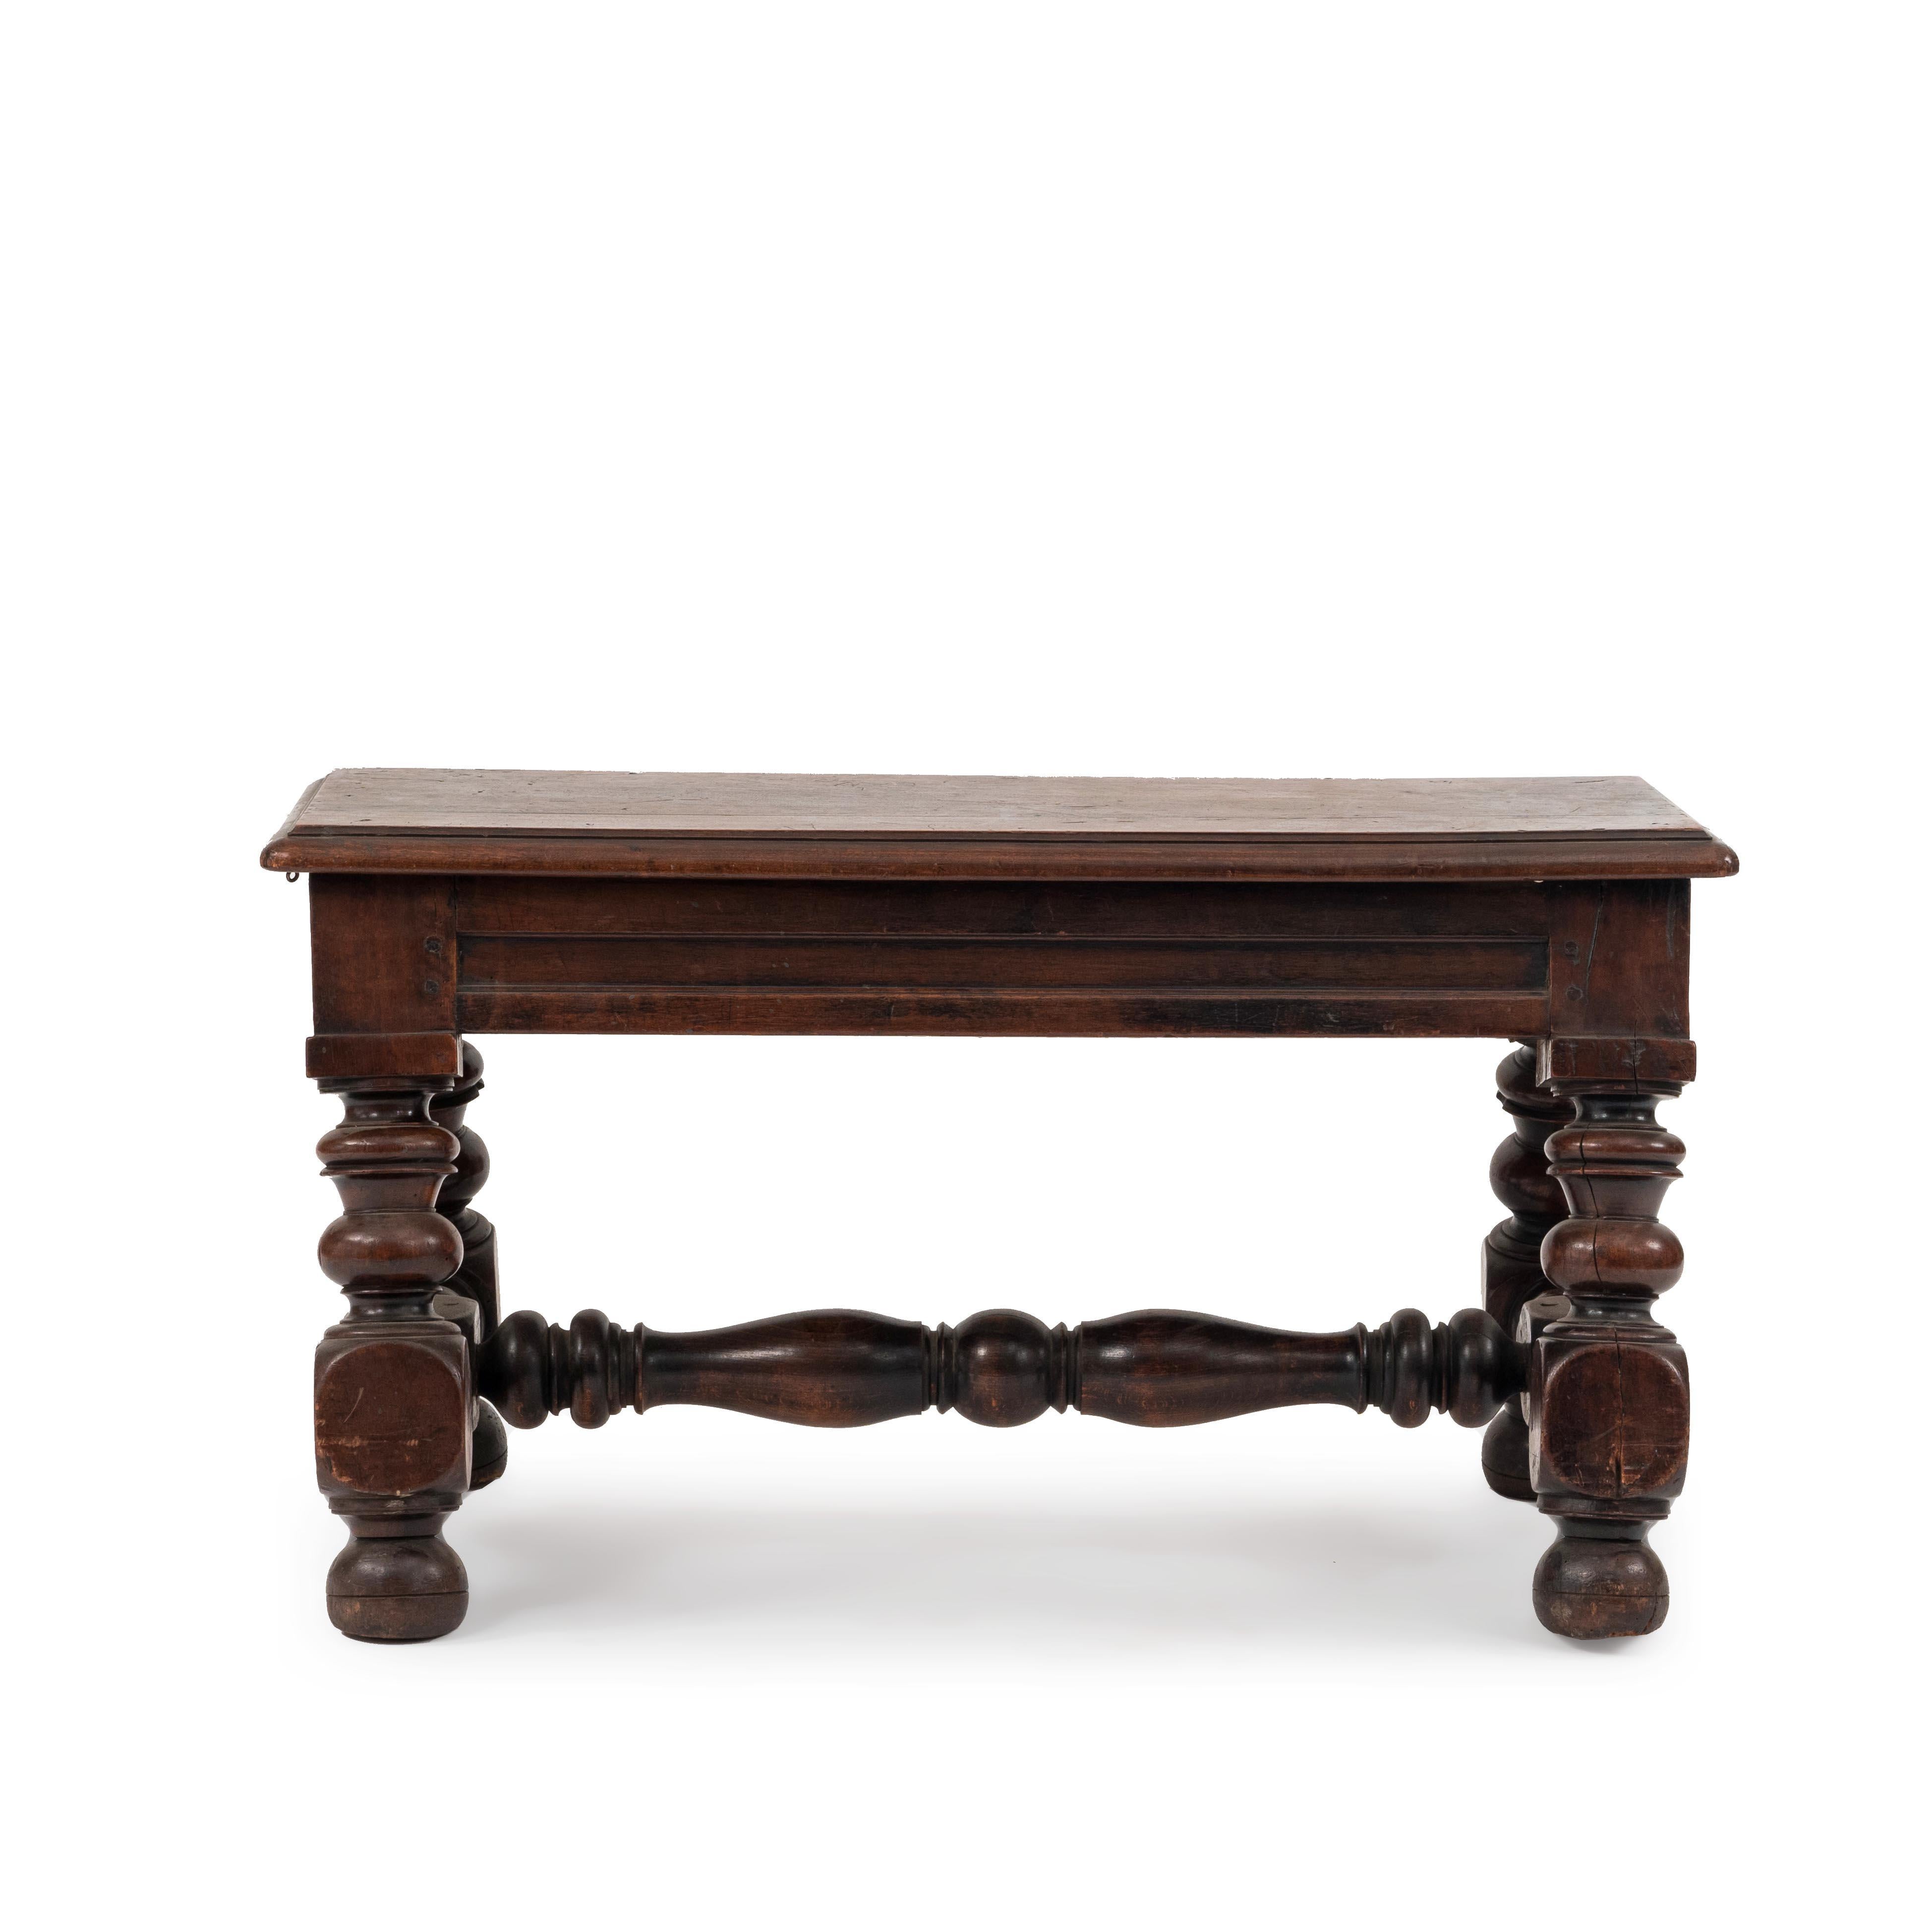 English Renaissance style walnut bench with heavy turned legs joined by an H stretcher